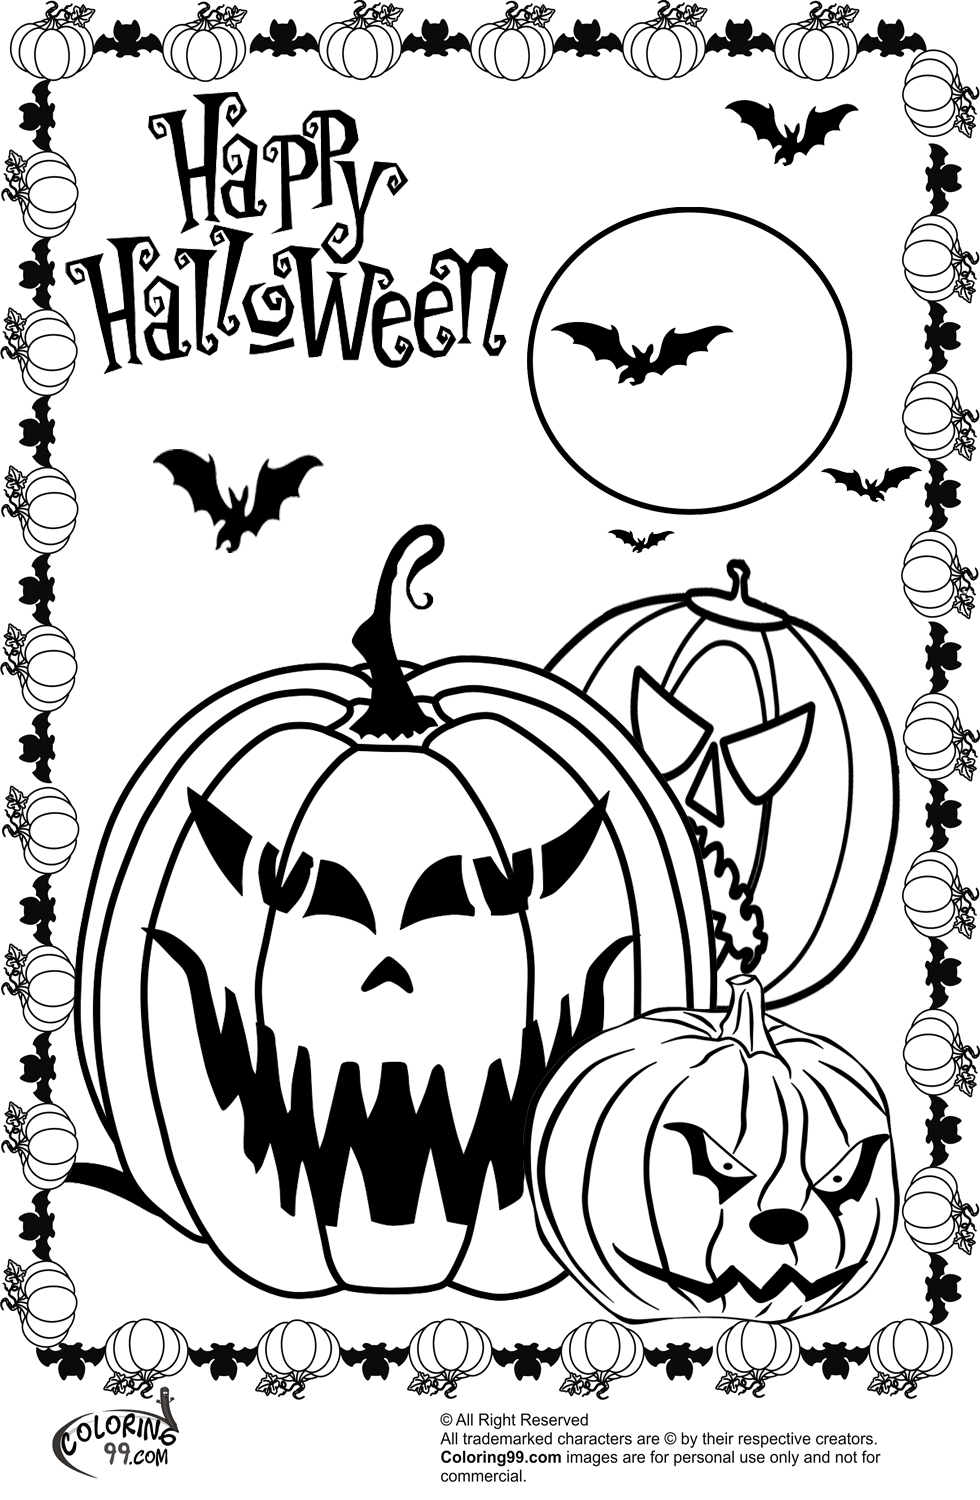 Download Scary Halloween Pumpkin Coloring Pages | Team colors